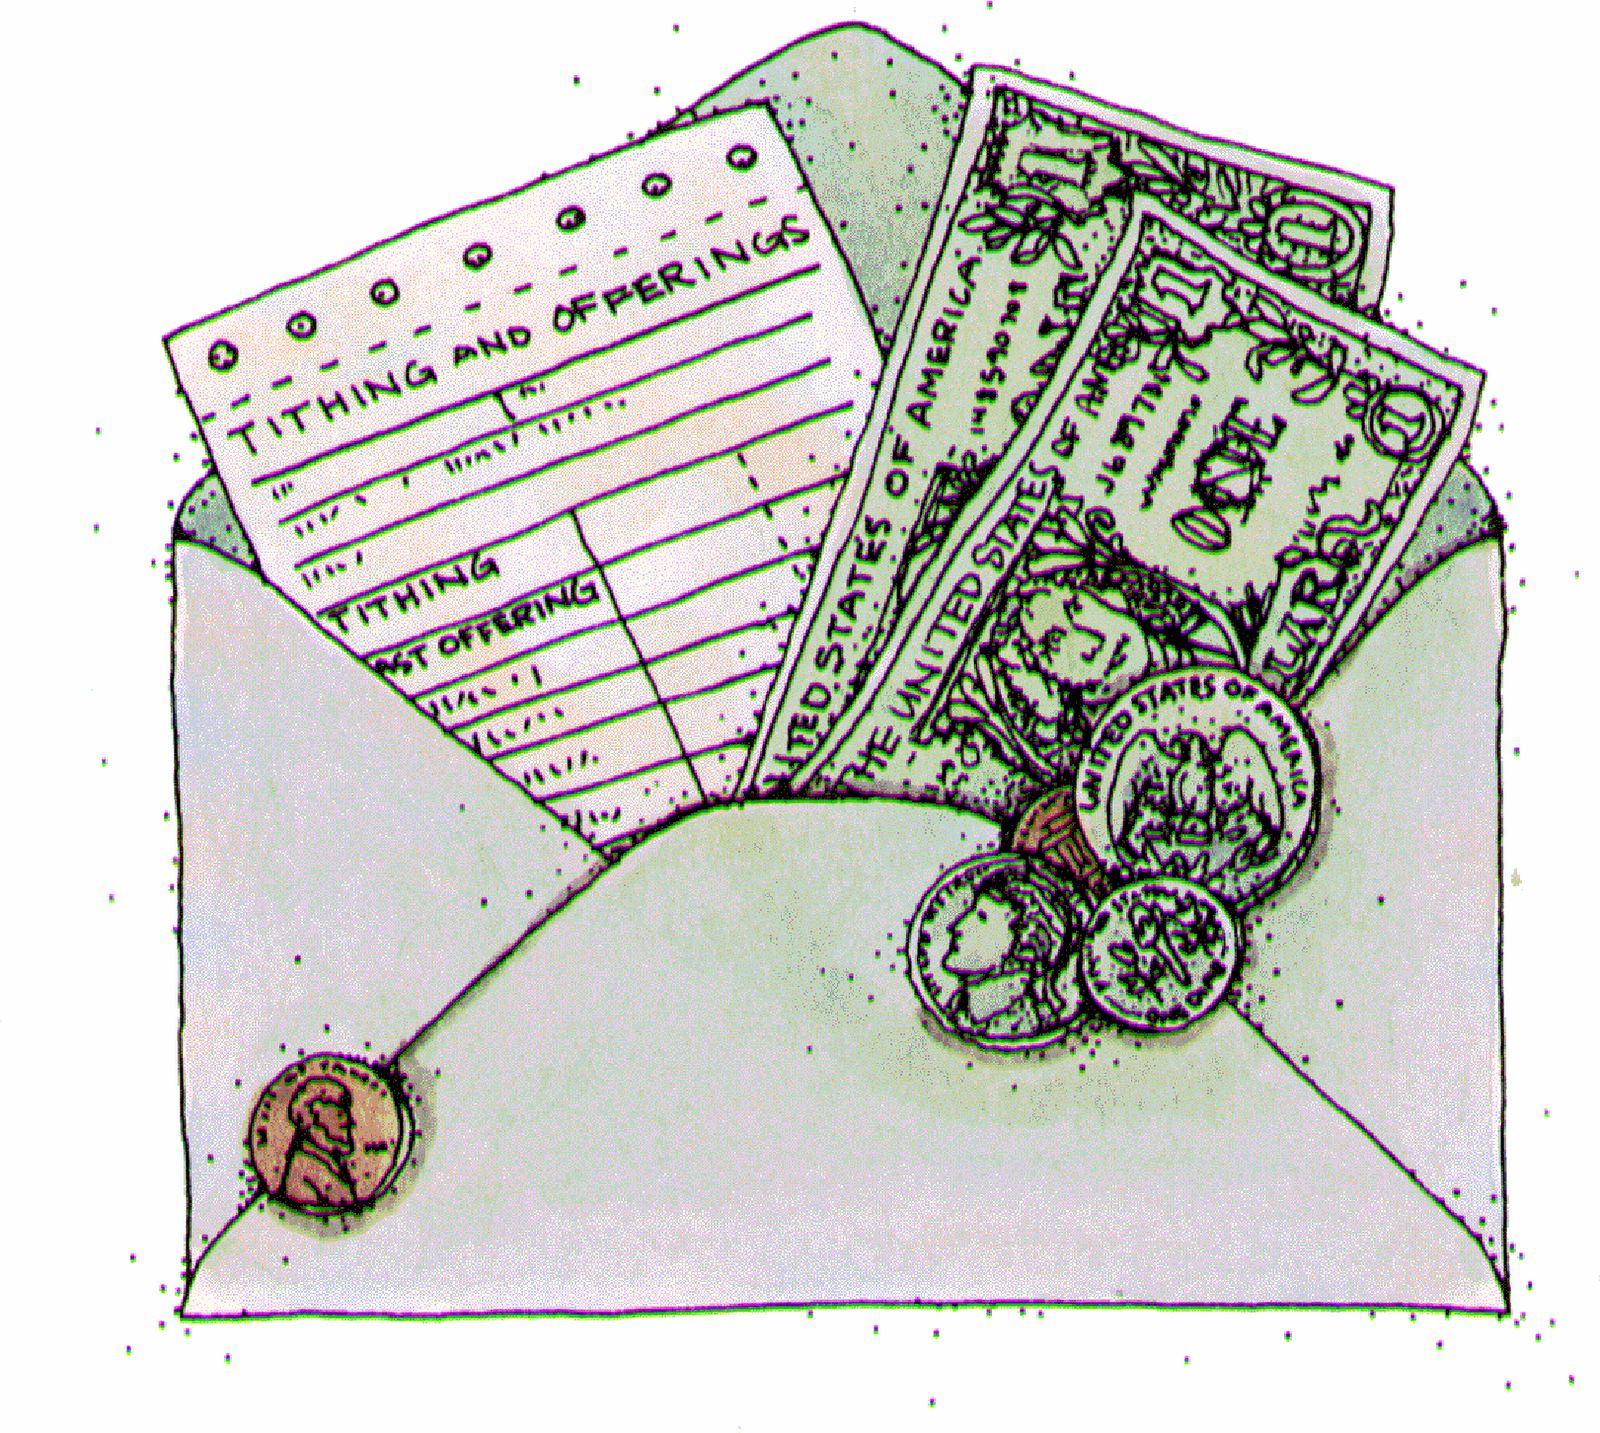 Tithing Clipart  By Anie J  Haven Published January 25 2012 Full Size